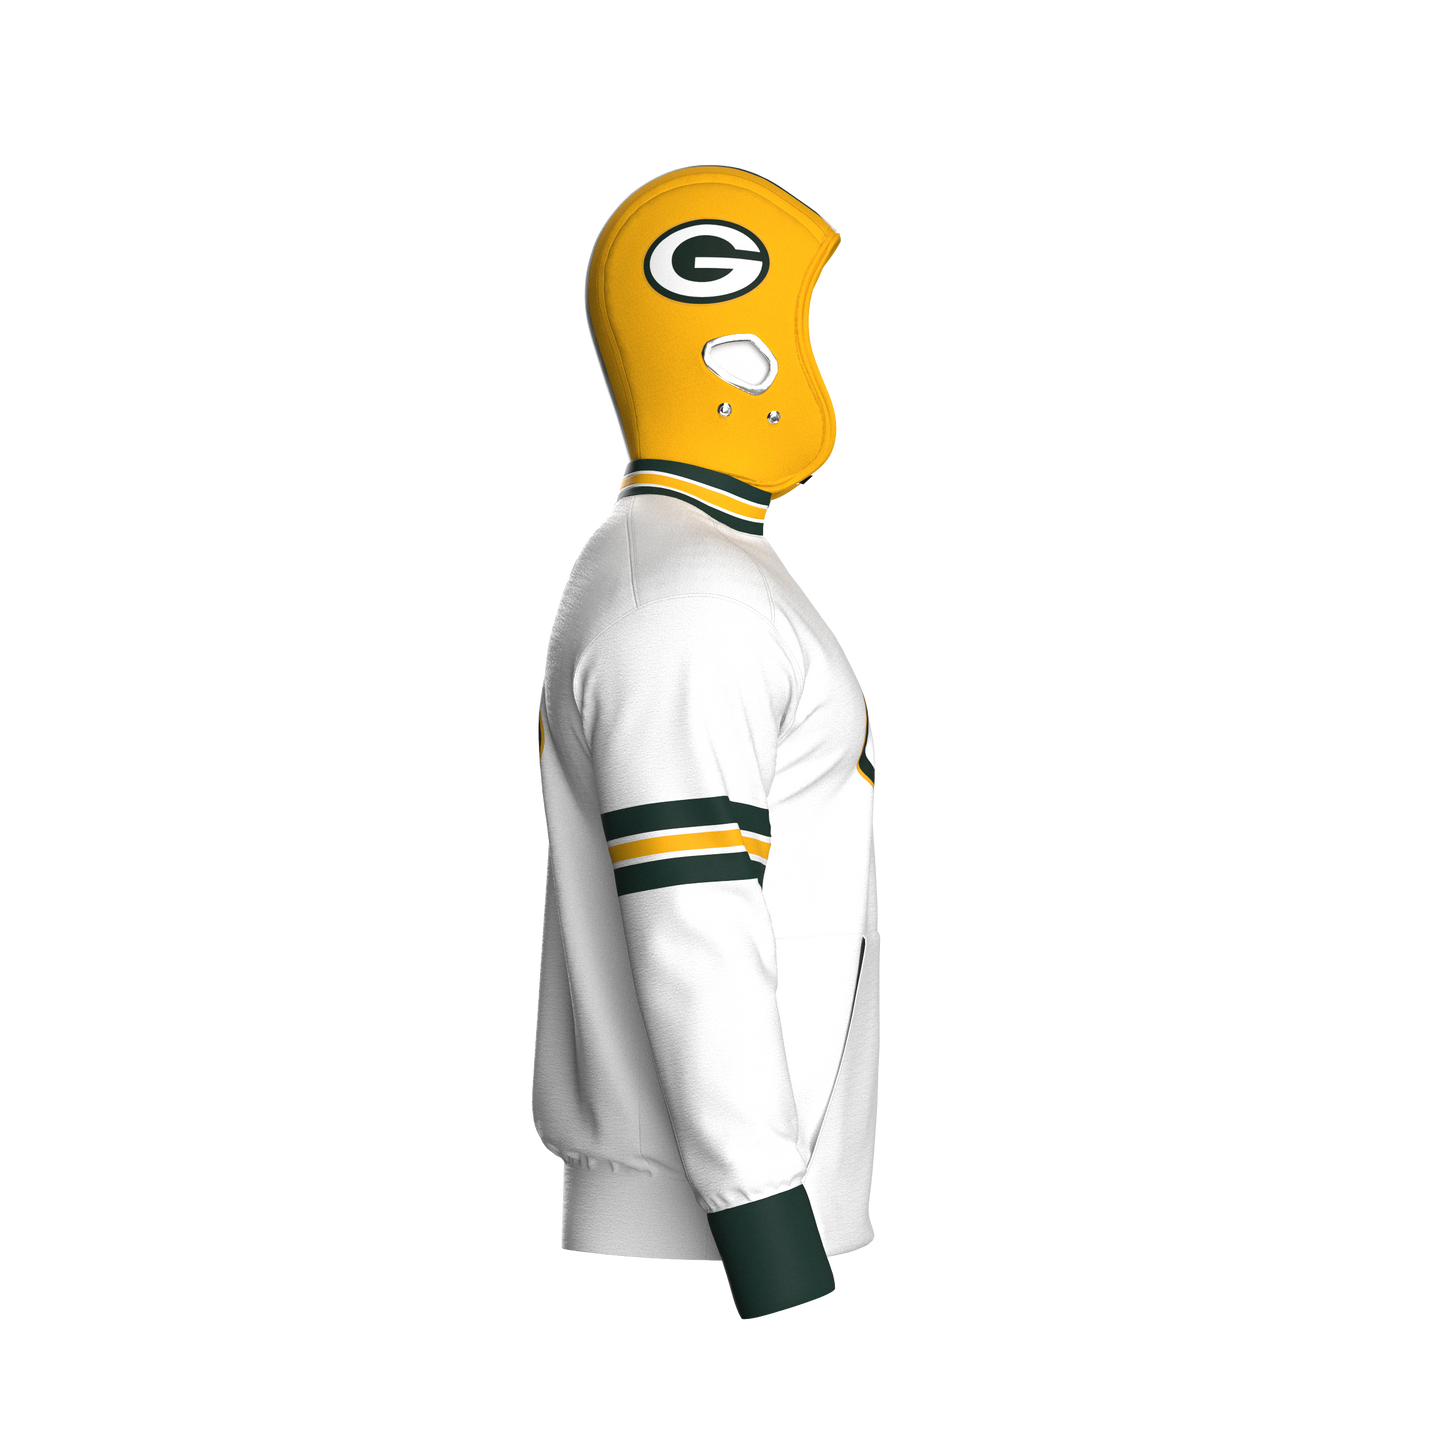 Green Bay Packers Away Pullover (adult)